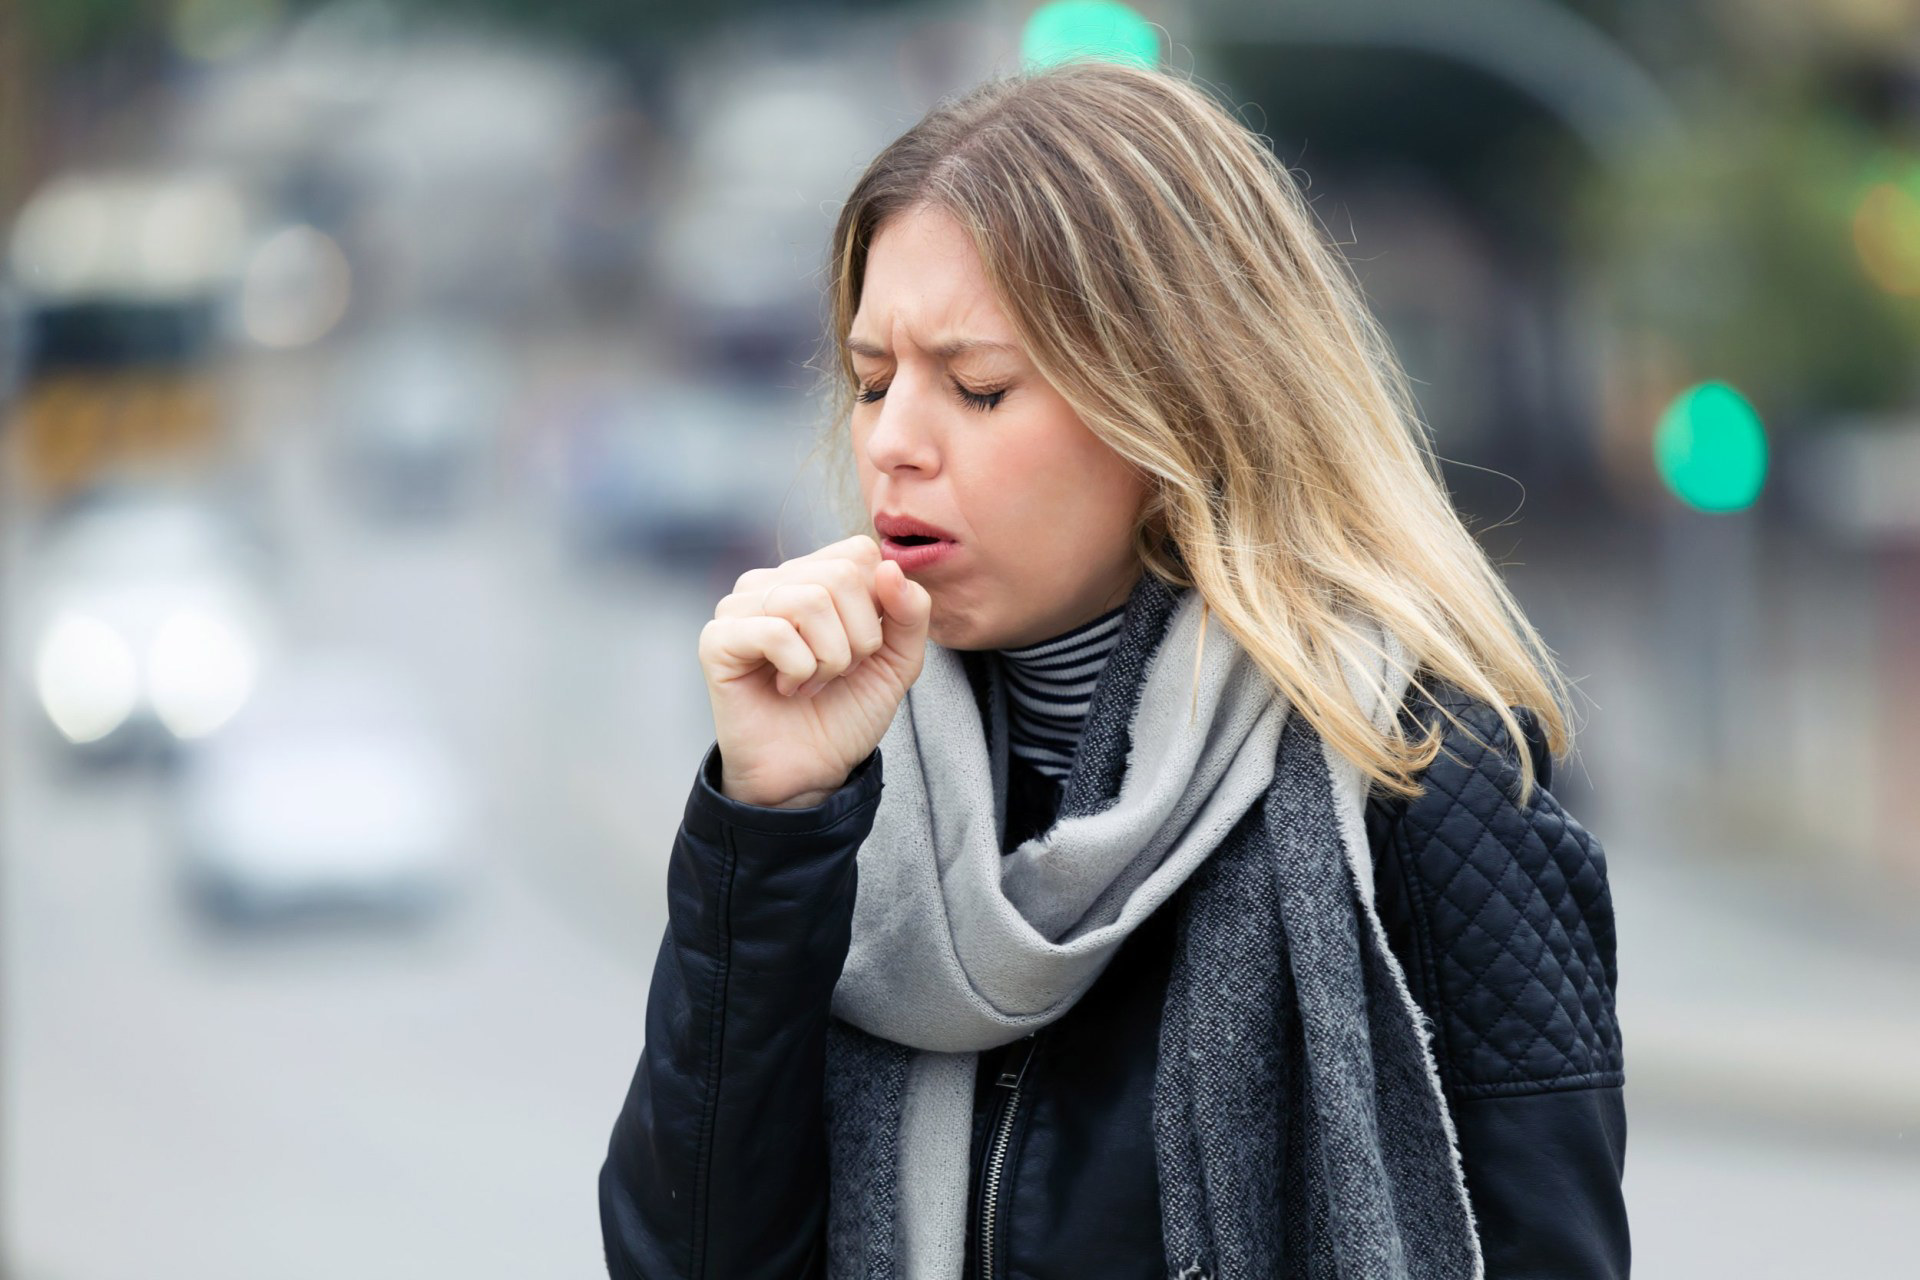 Spike in cases of '100daycough' that's quickly spreading across the UK